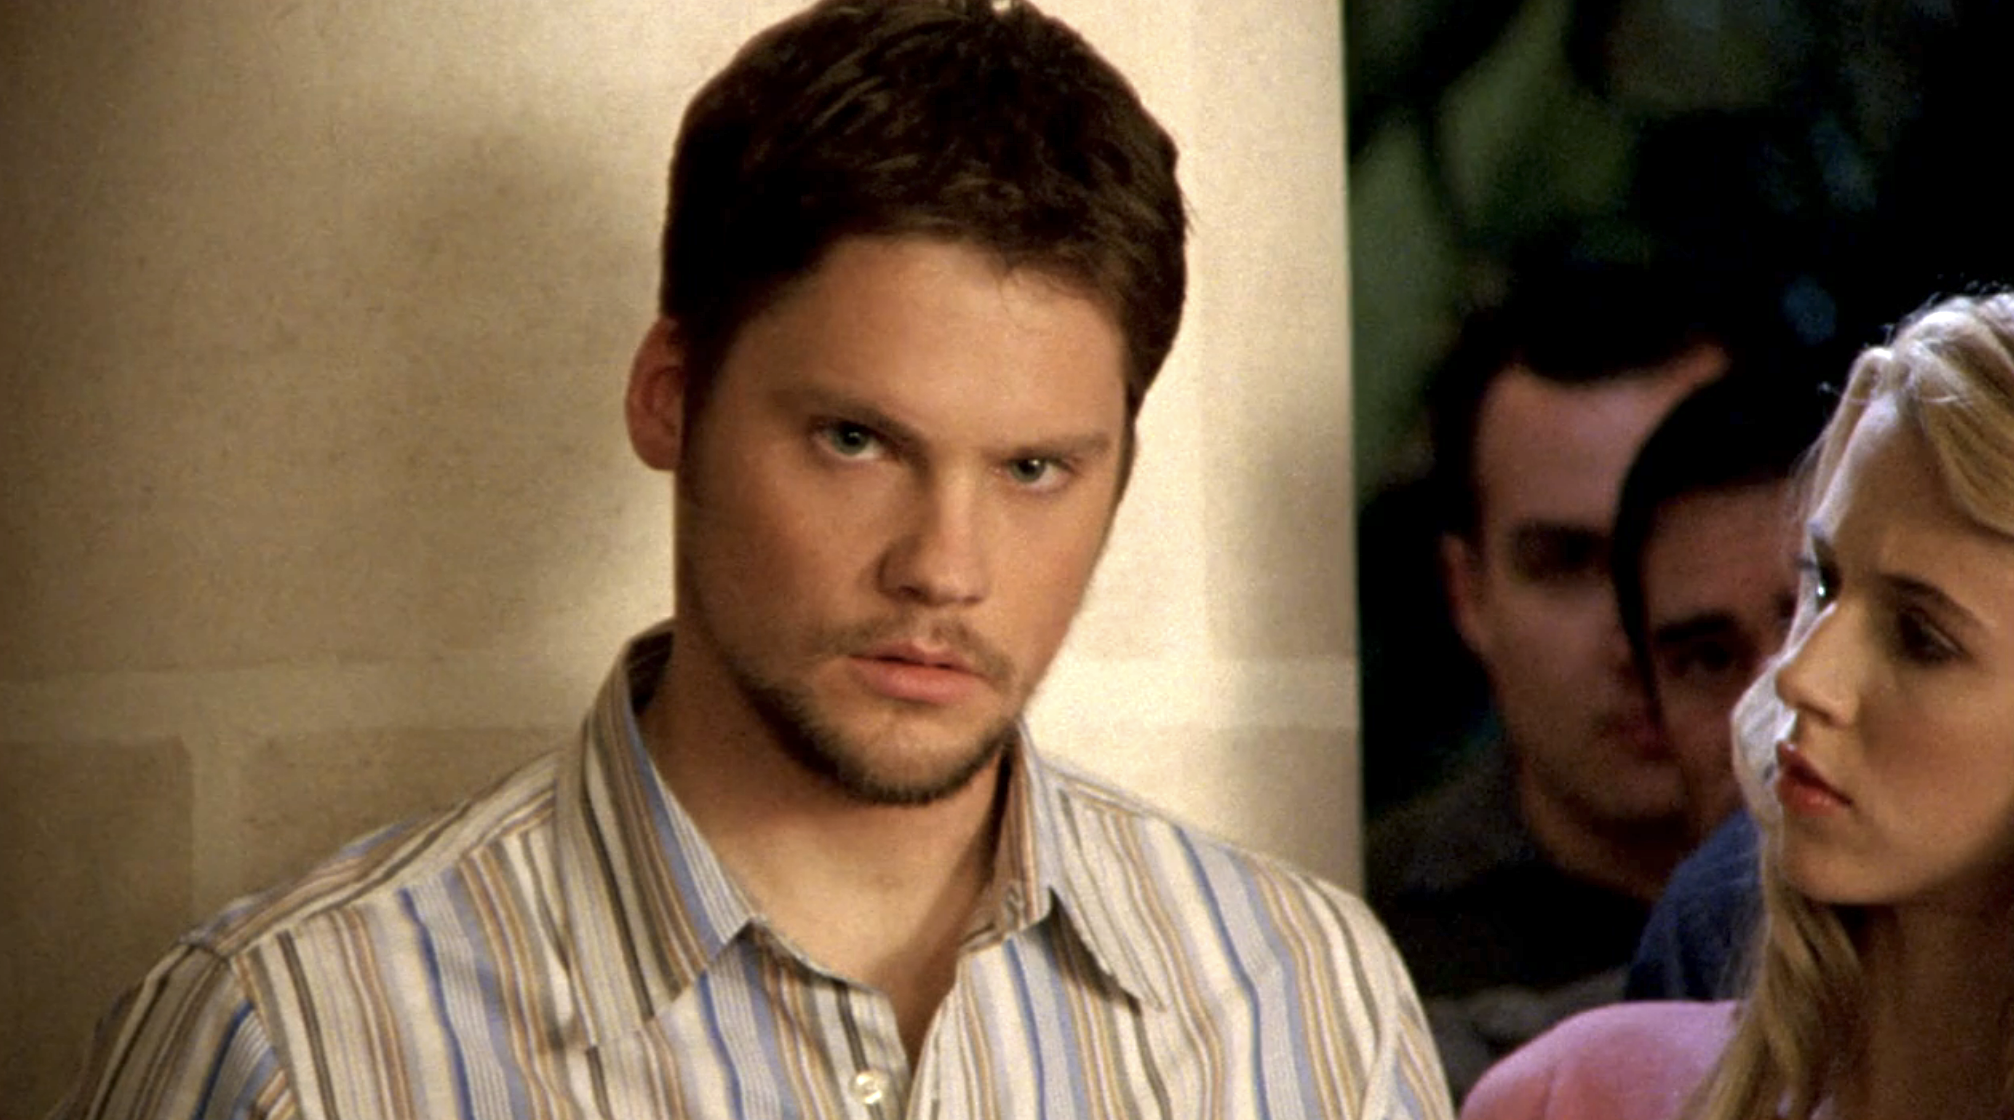 Screenshot from S1E21 of Veronica Mars. Duncan is looking upset at something offscreen. He's wearing a striped button down shirt. Meg is standing to his left looking at him.